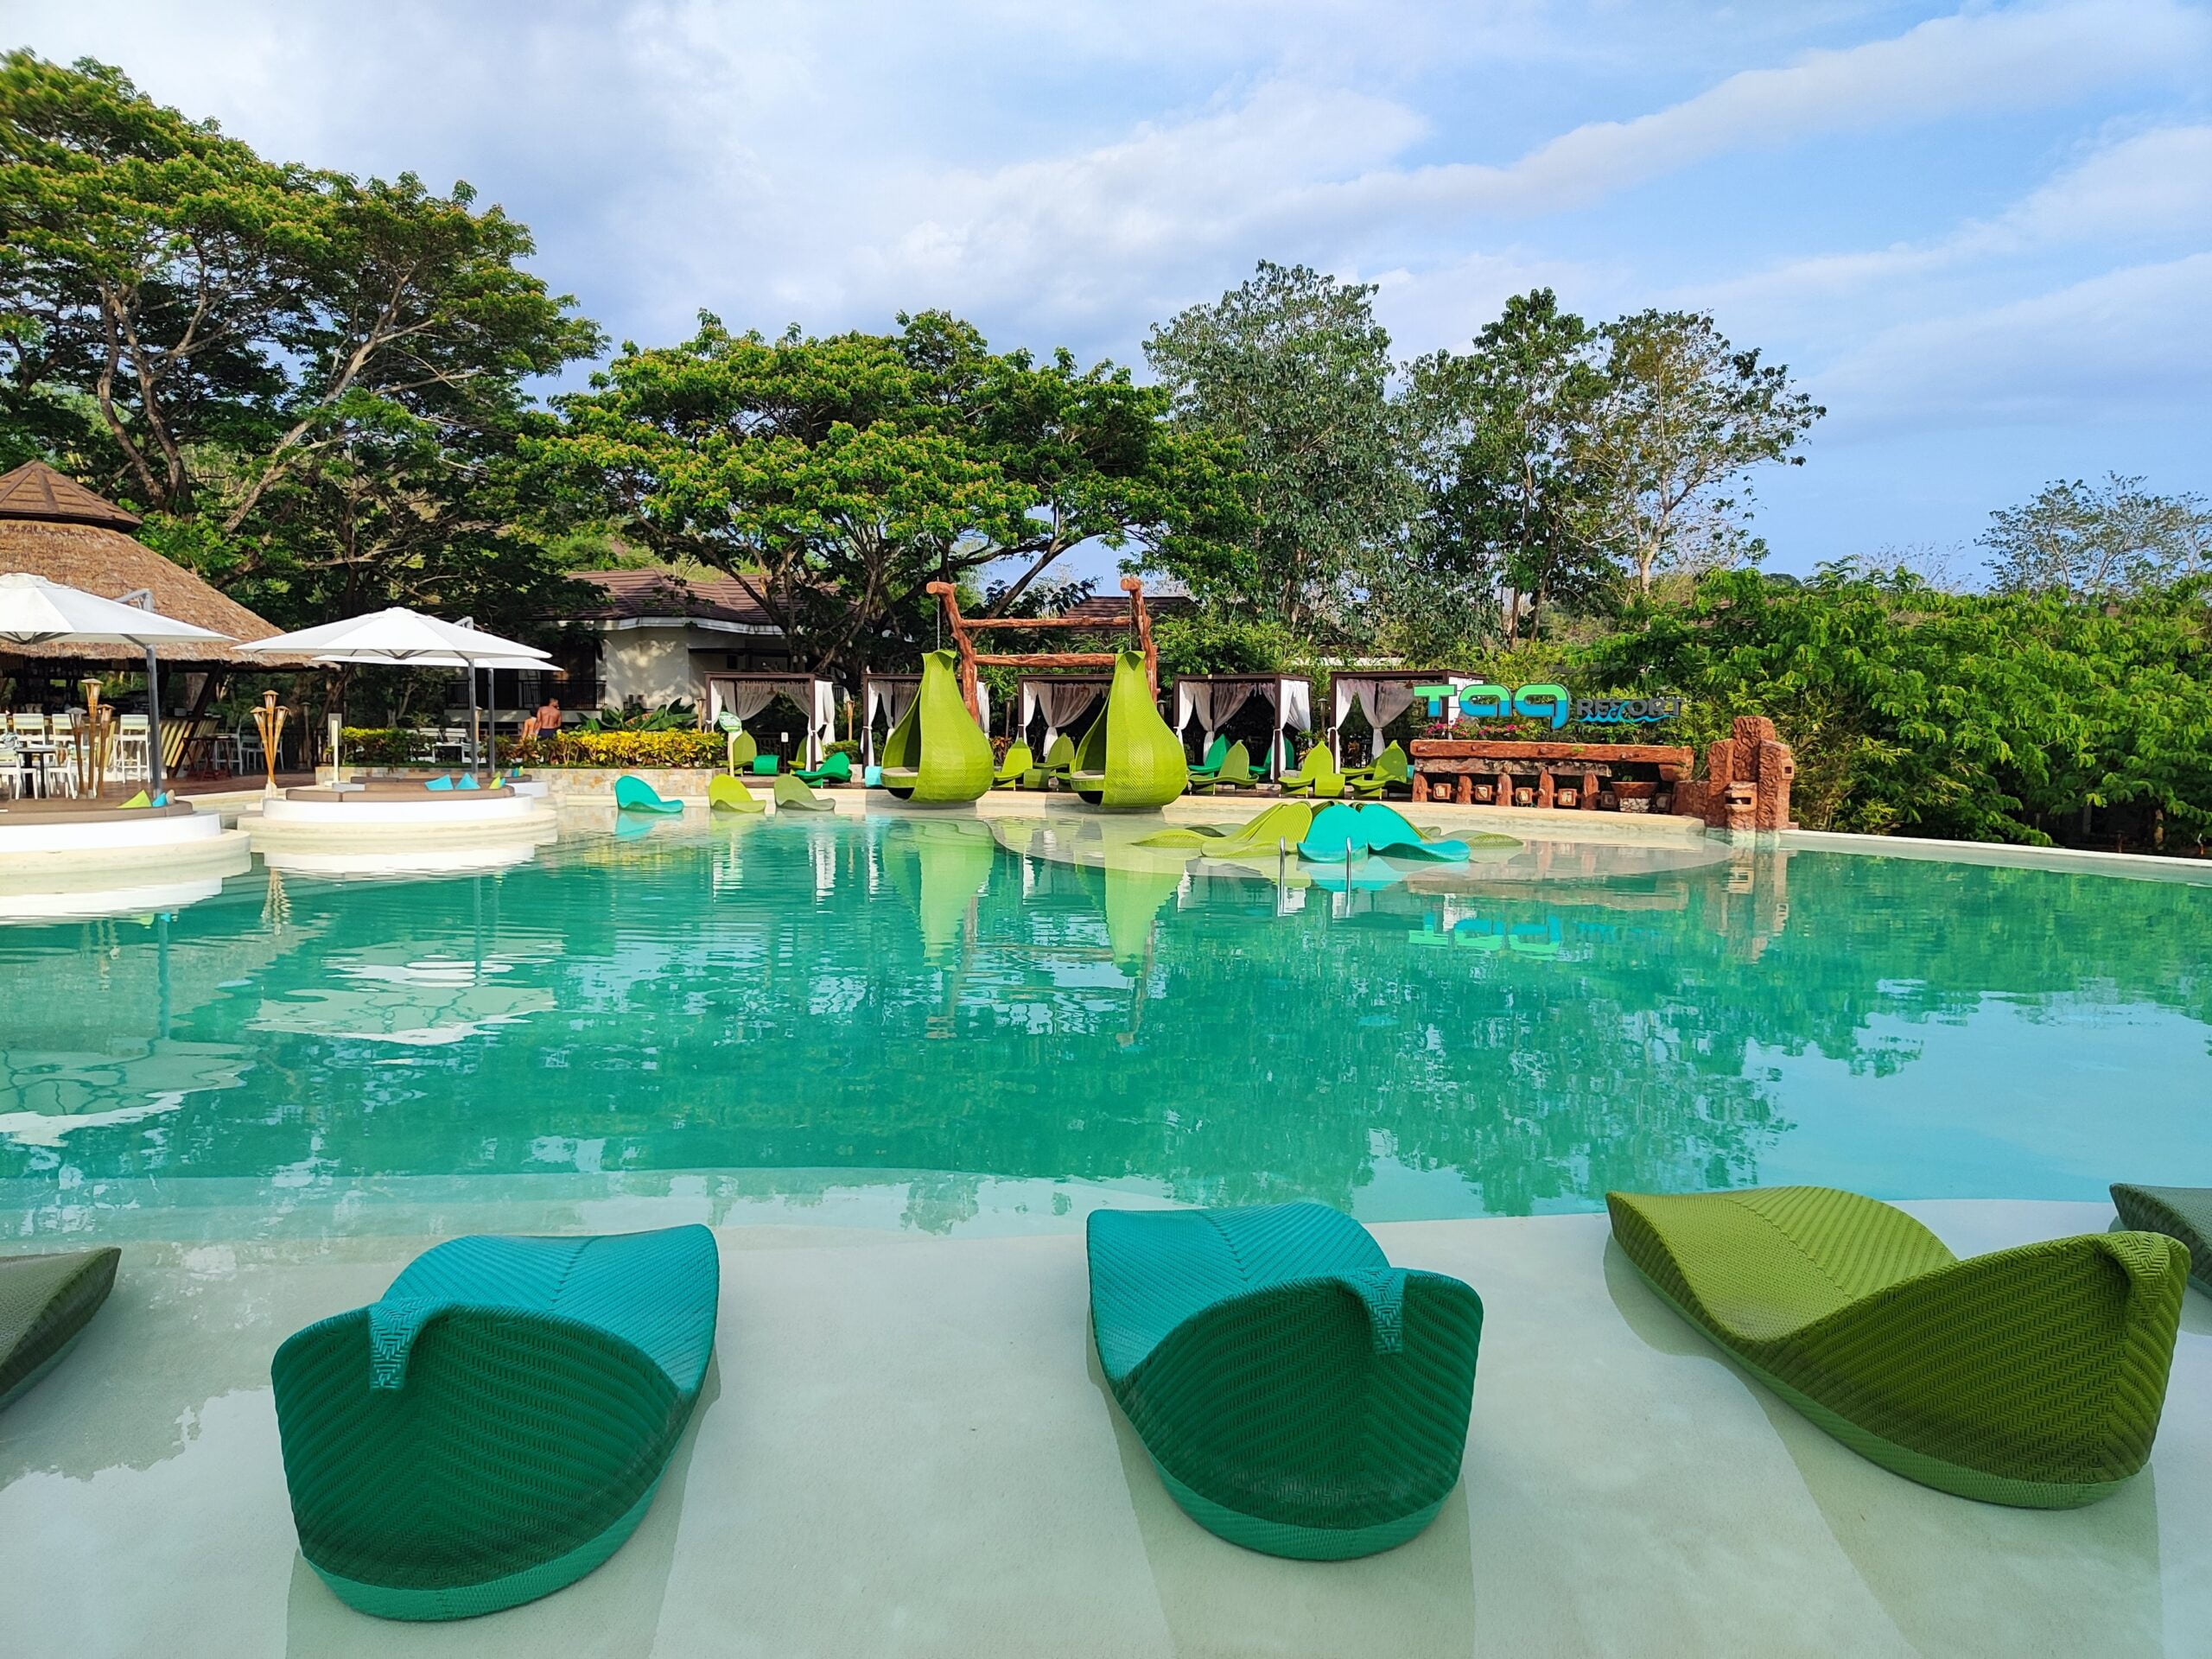 The Best Place to Stay in Coron is TAG RESORT CORON: Here’s Why!